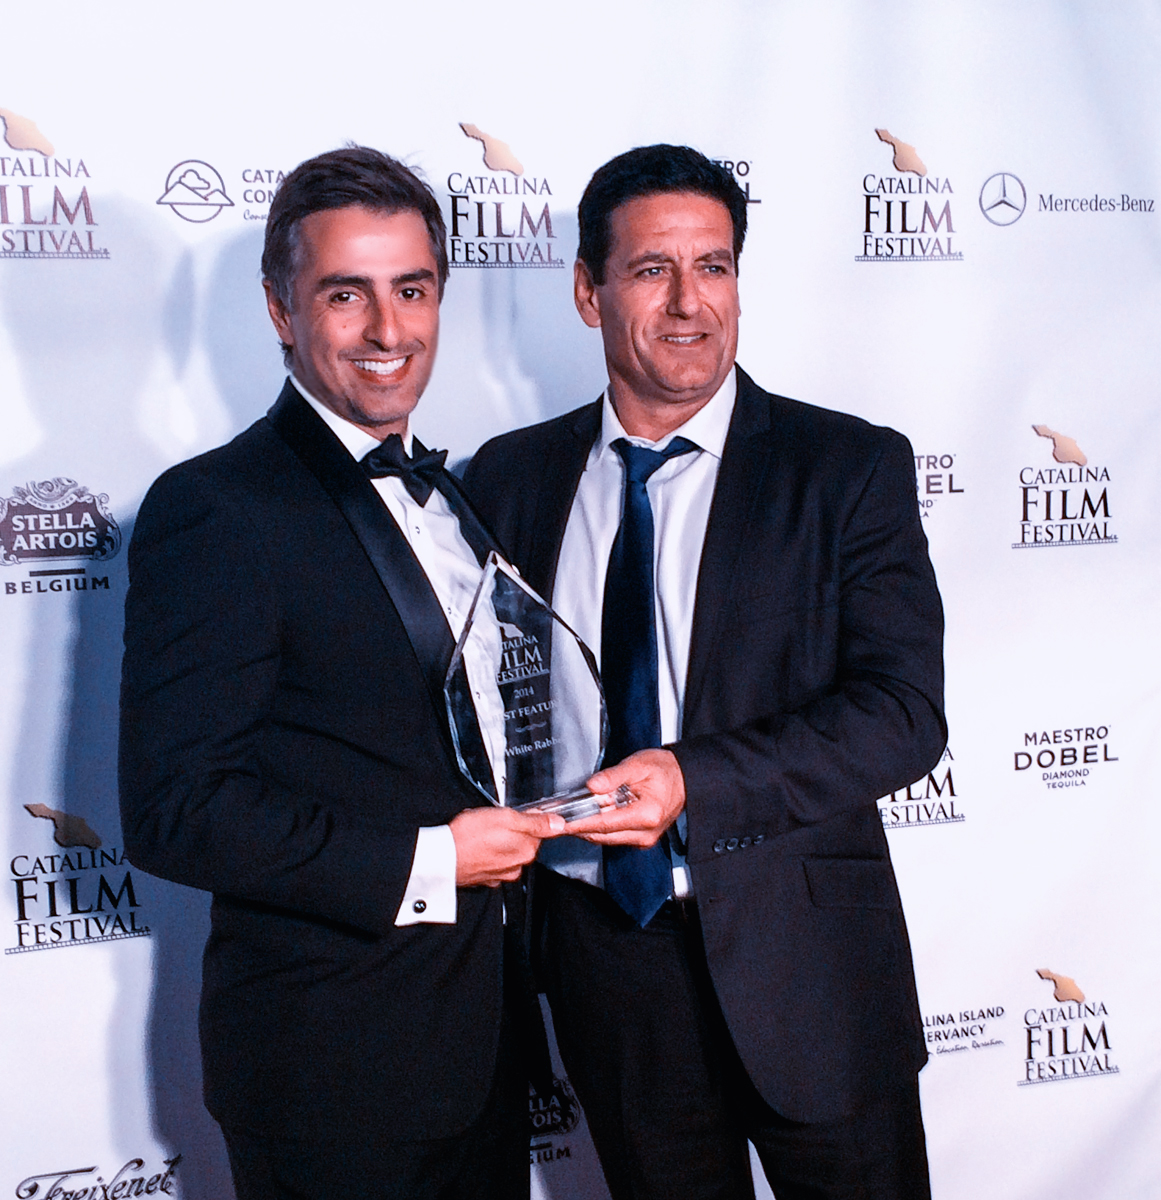 'White Rabbit'won Best Feature at the 2014 Catalina Film Festival